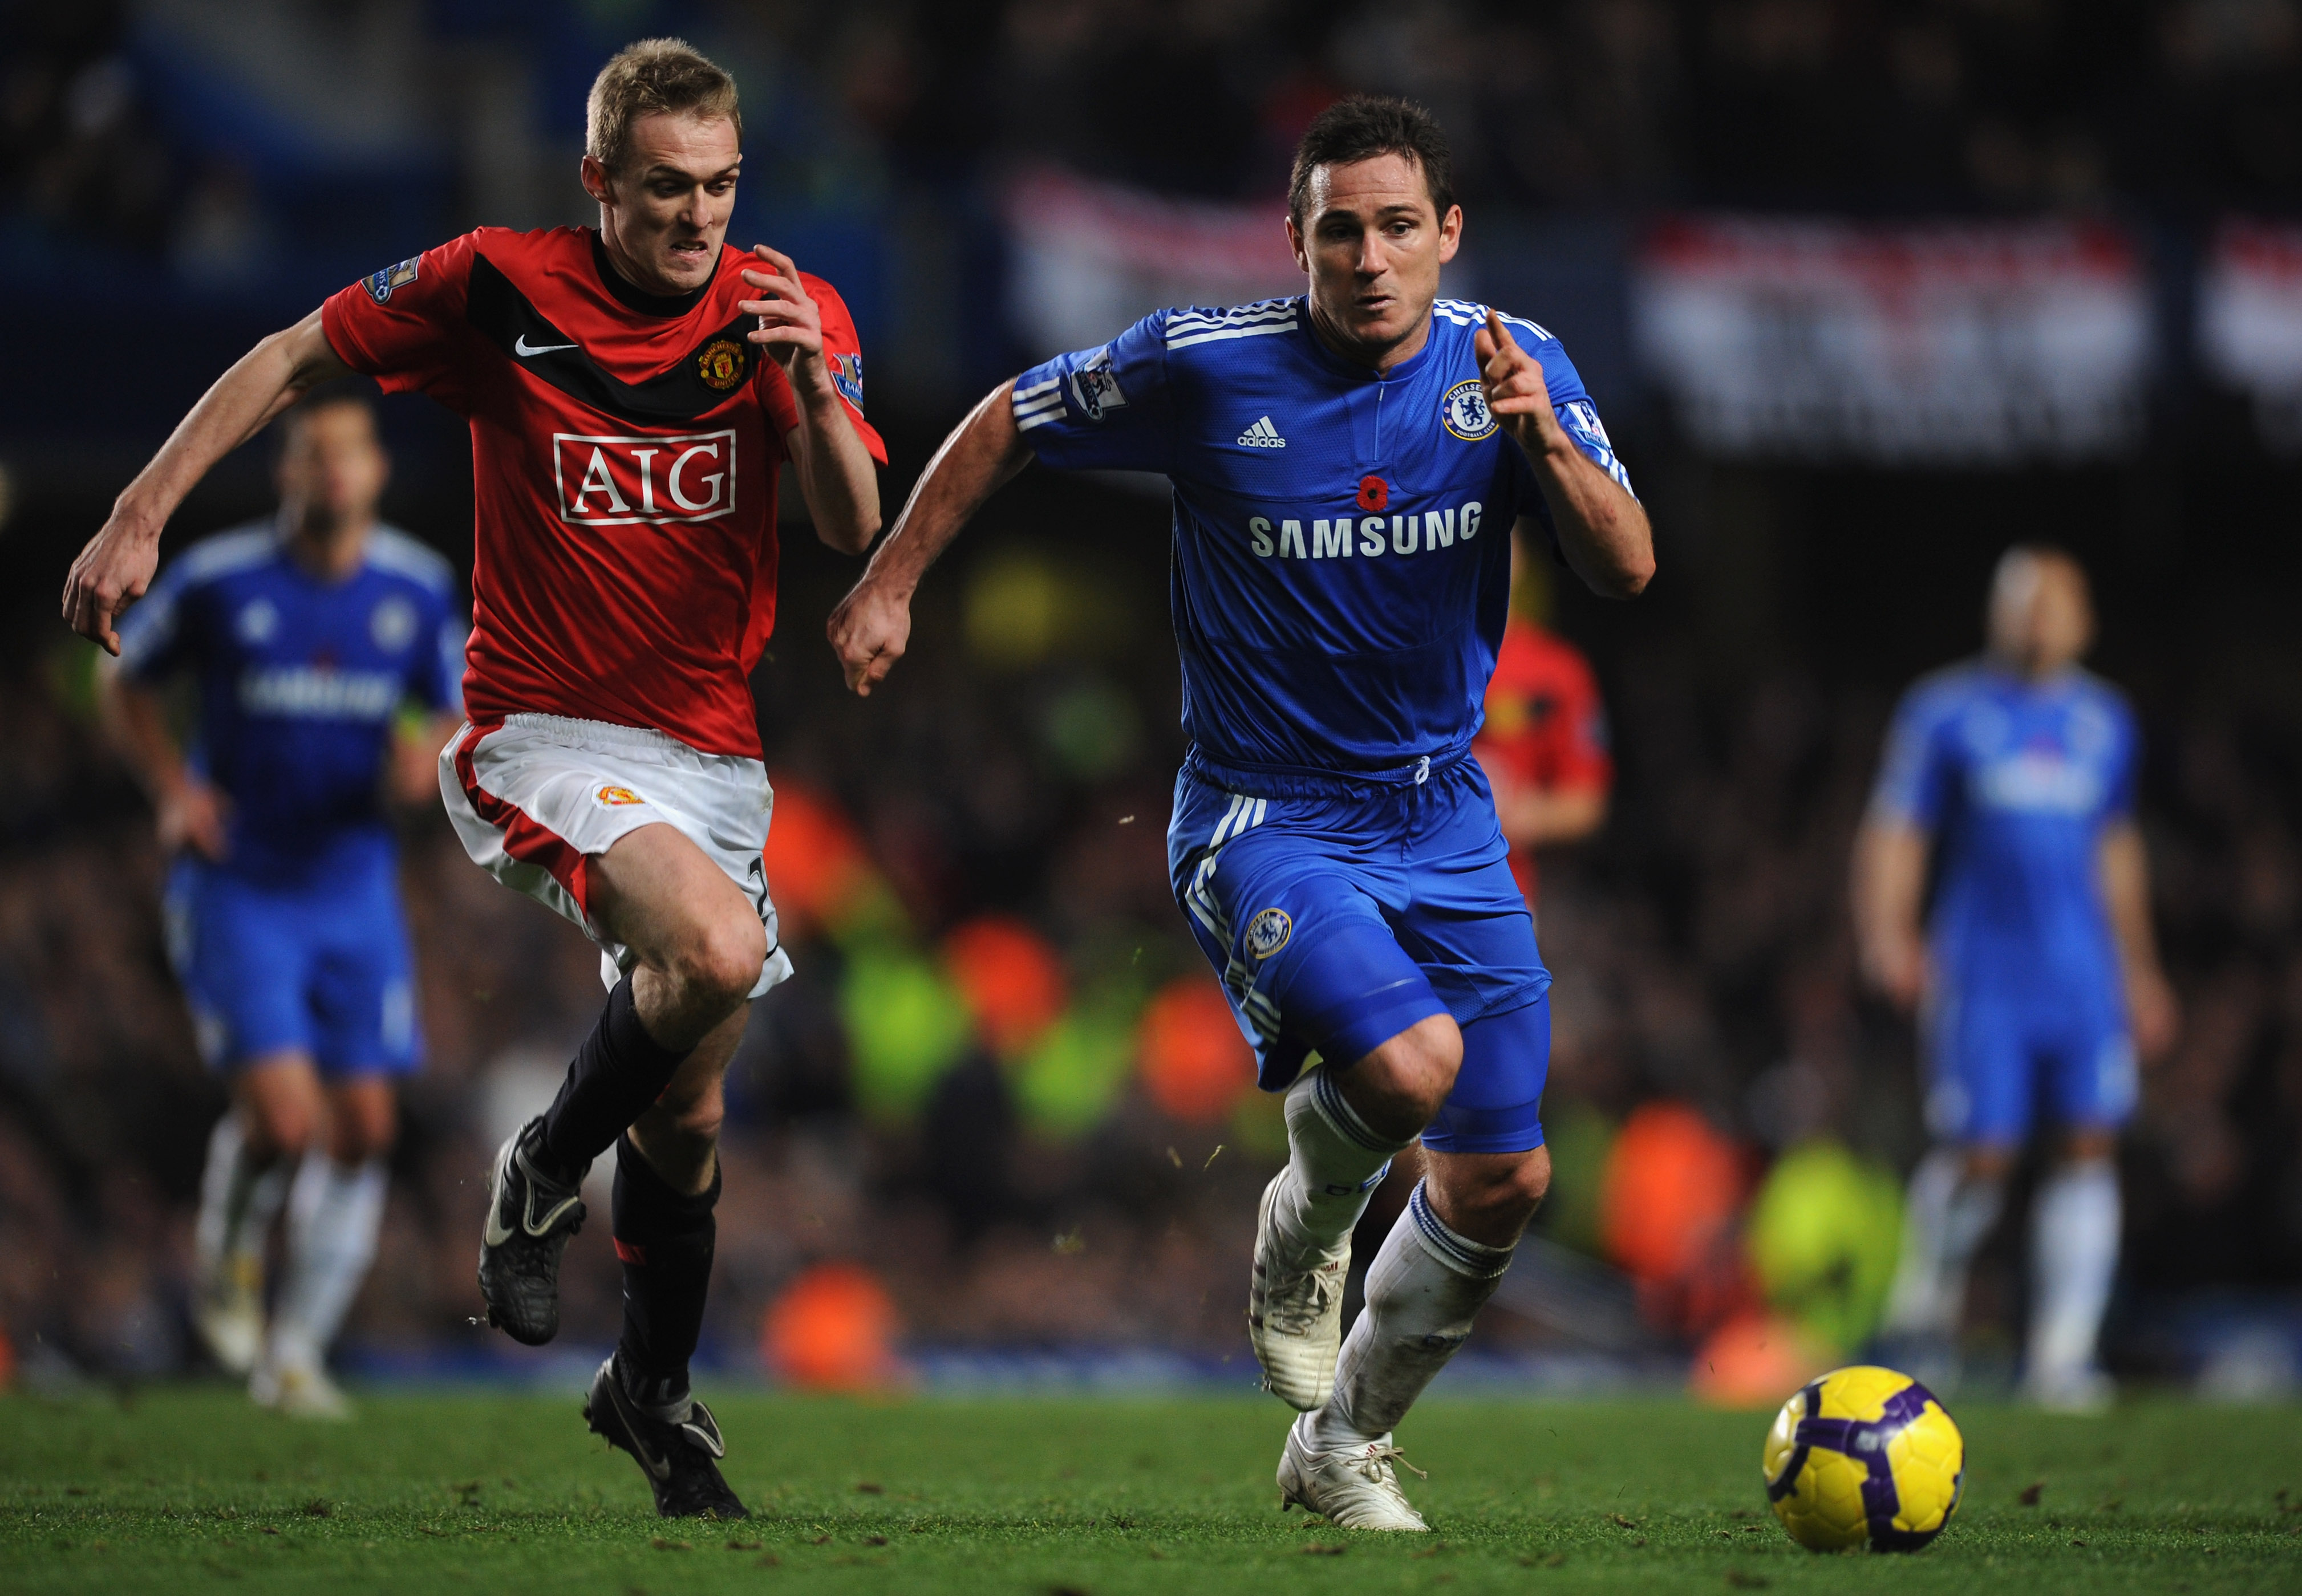 LONDON, ENGLAND - NOVEMBER 08:  Darren Fletcher of Manchester United and Frank Lampard of Chelsea pursue the ball during the Barclays Premier League match between Chelsea and Manchester United at Stamford Bridge on November 8, 2009 in London, England.  (P